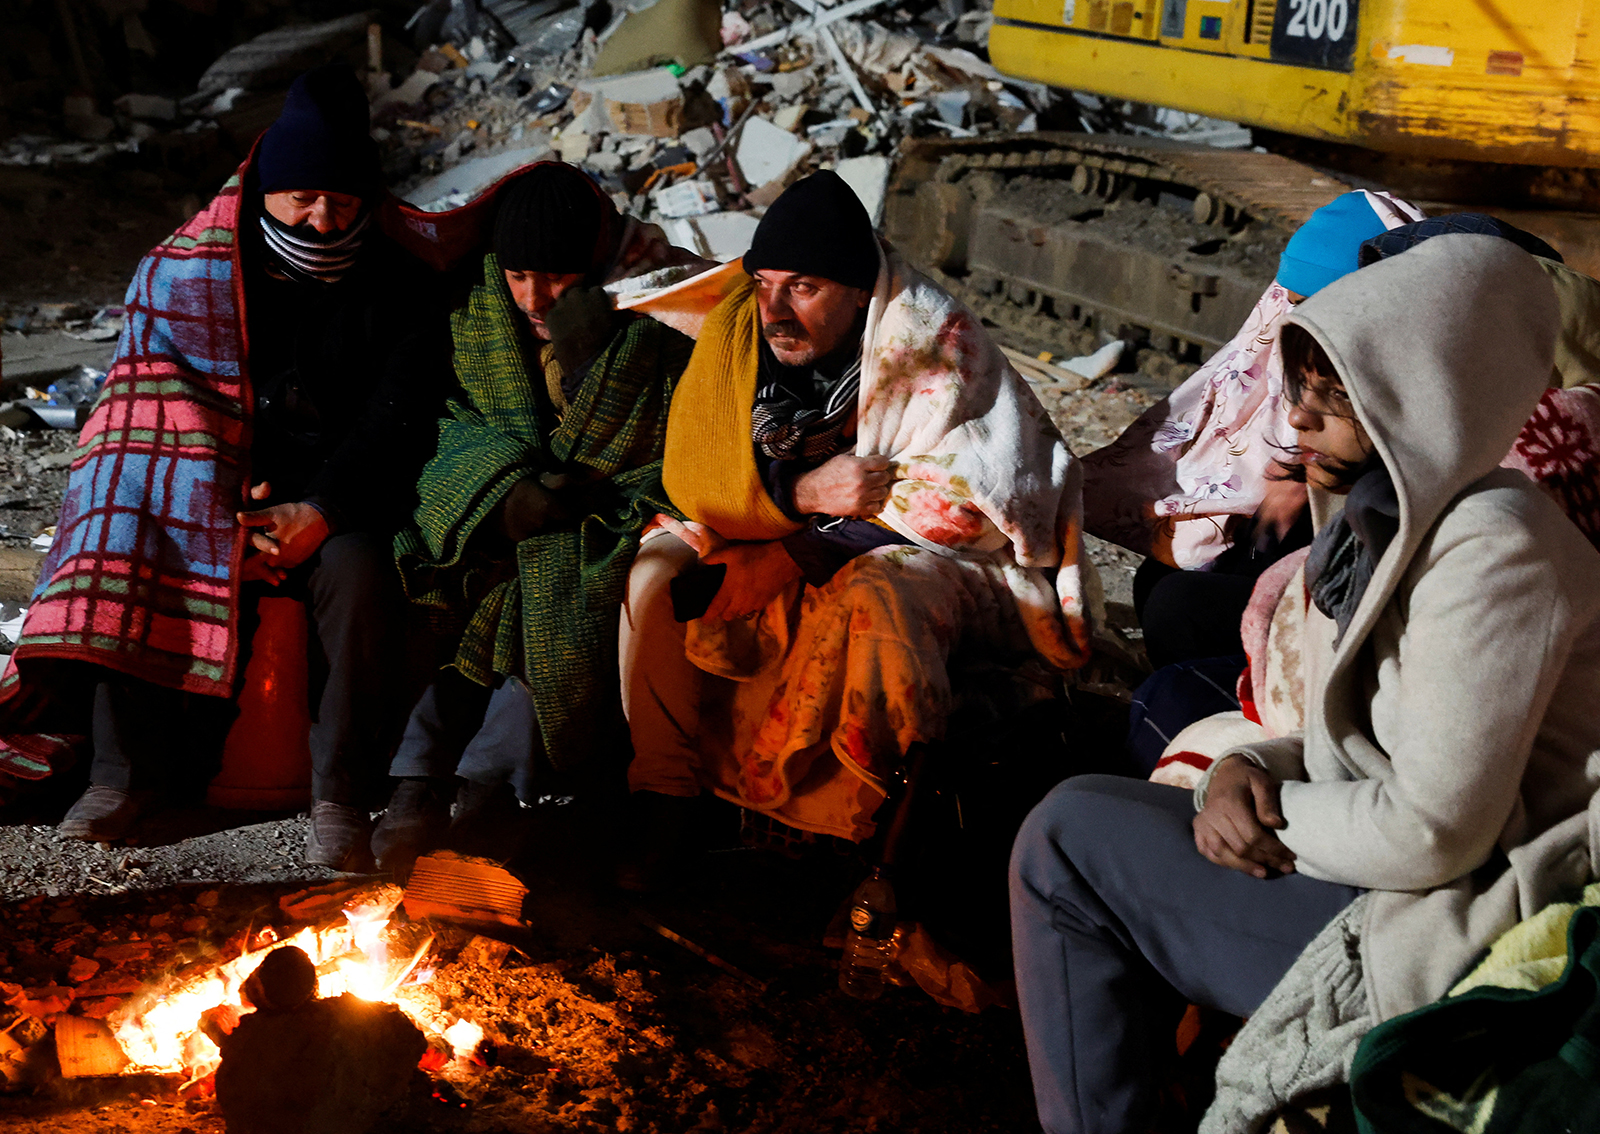 Rescue workers of ISAR Germany wait by a fire during a rescue operation in Kirkhan, Turkey, on February 10. 